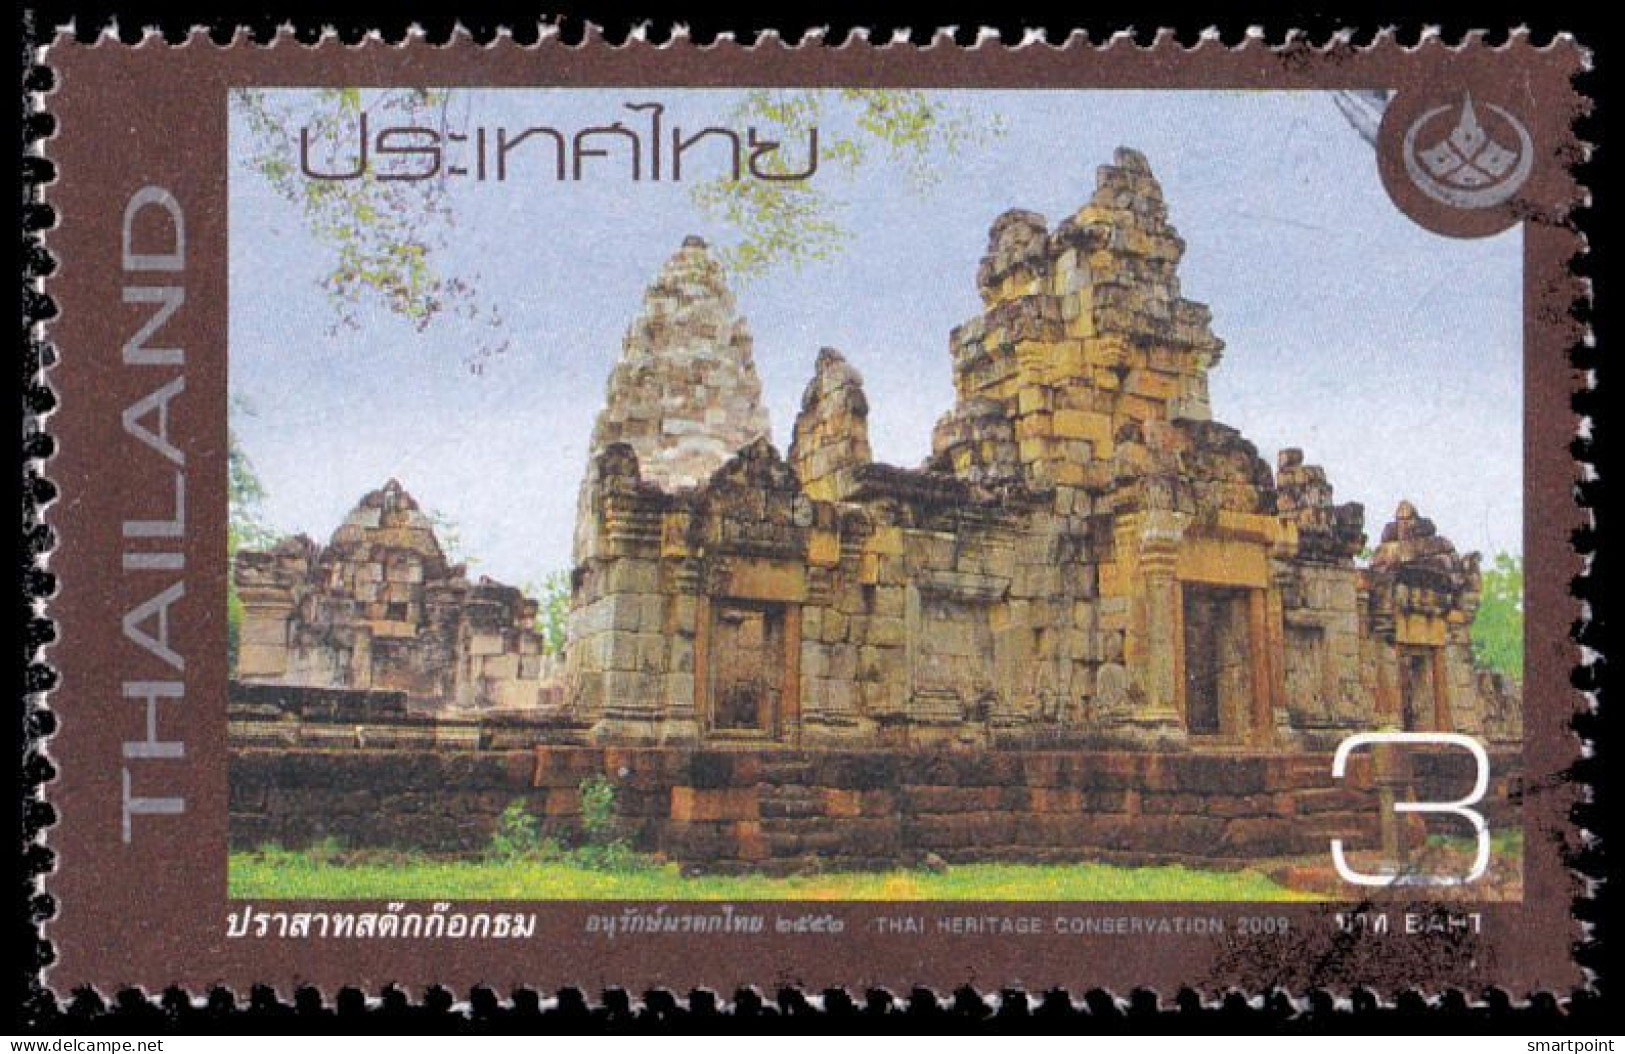 Thailand Stamp 2009 Thai Heritage Conservation Day 3 Baht - Used - Thailand